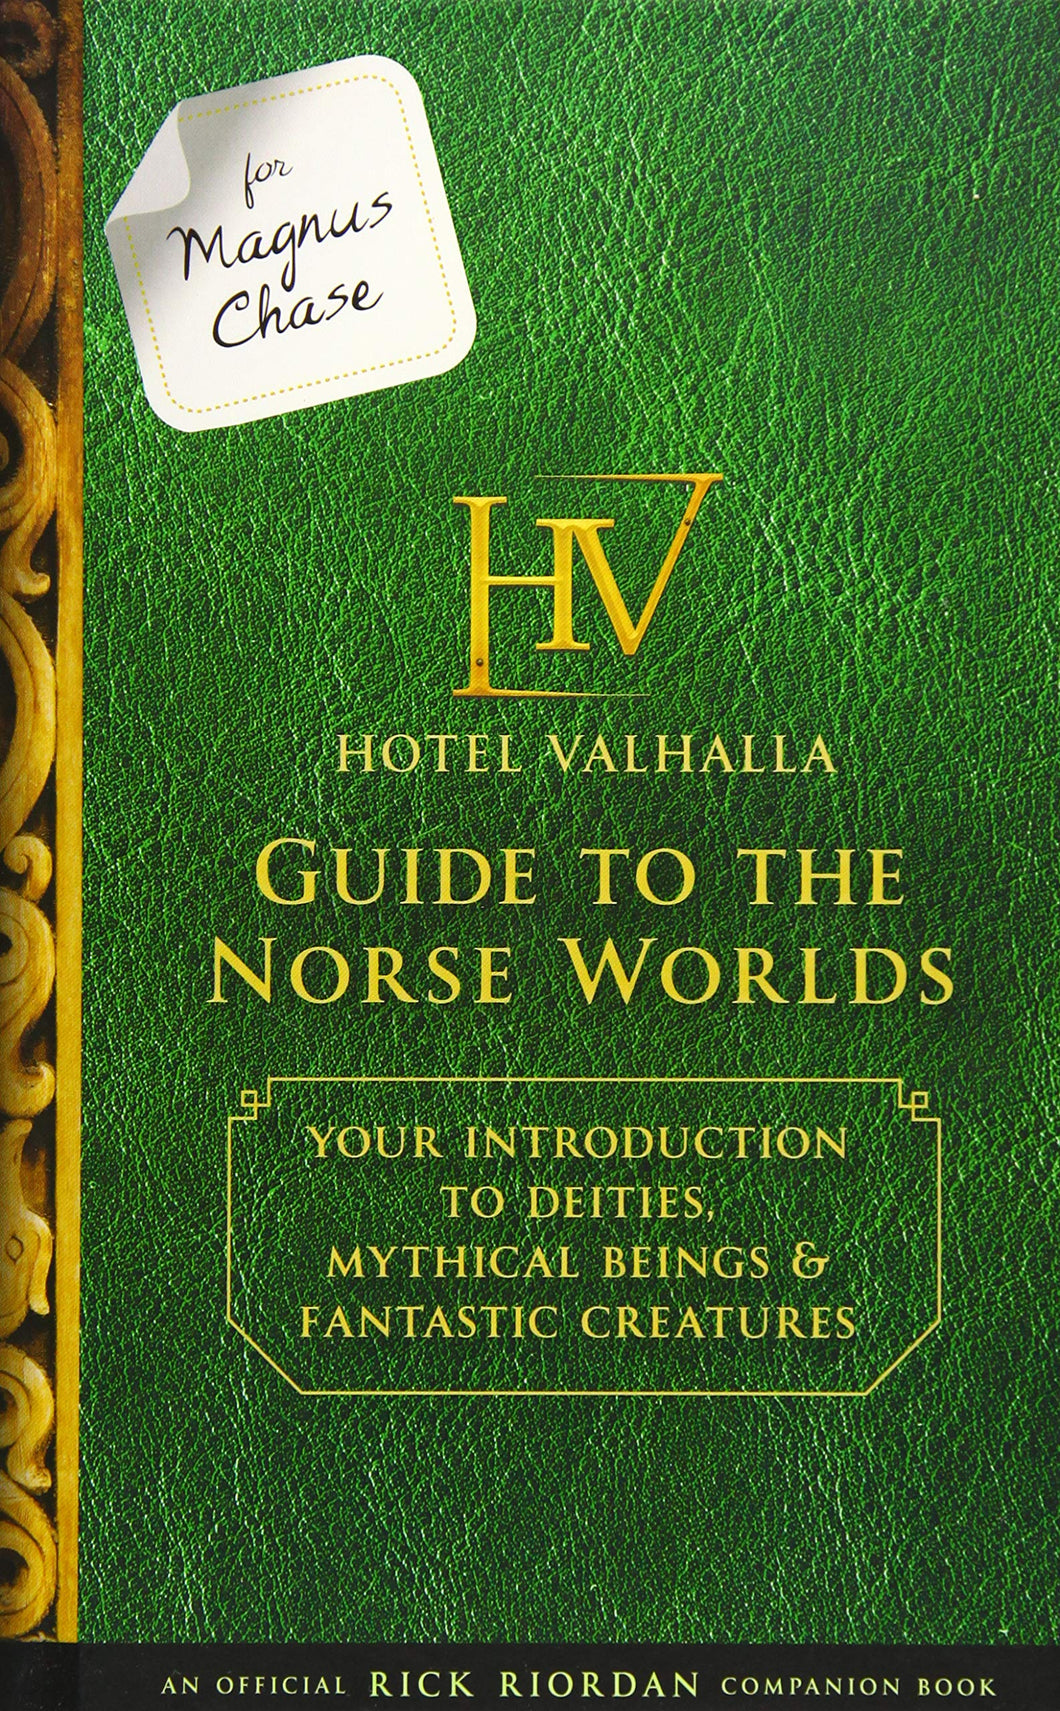 Hotel Valhalla Guide to the Norse Worlds (Magnus Chase and the Gods of Asgard, Companion Guide)